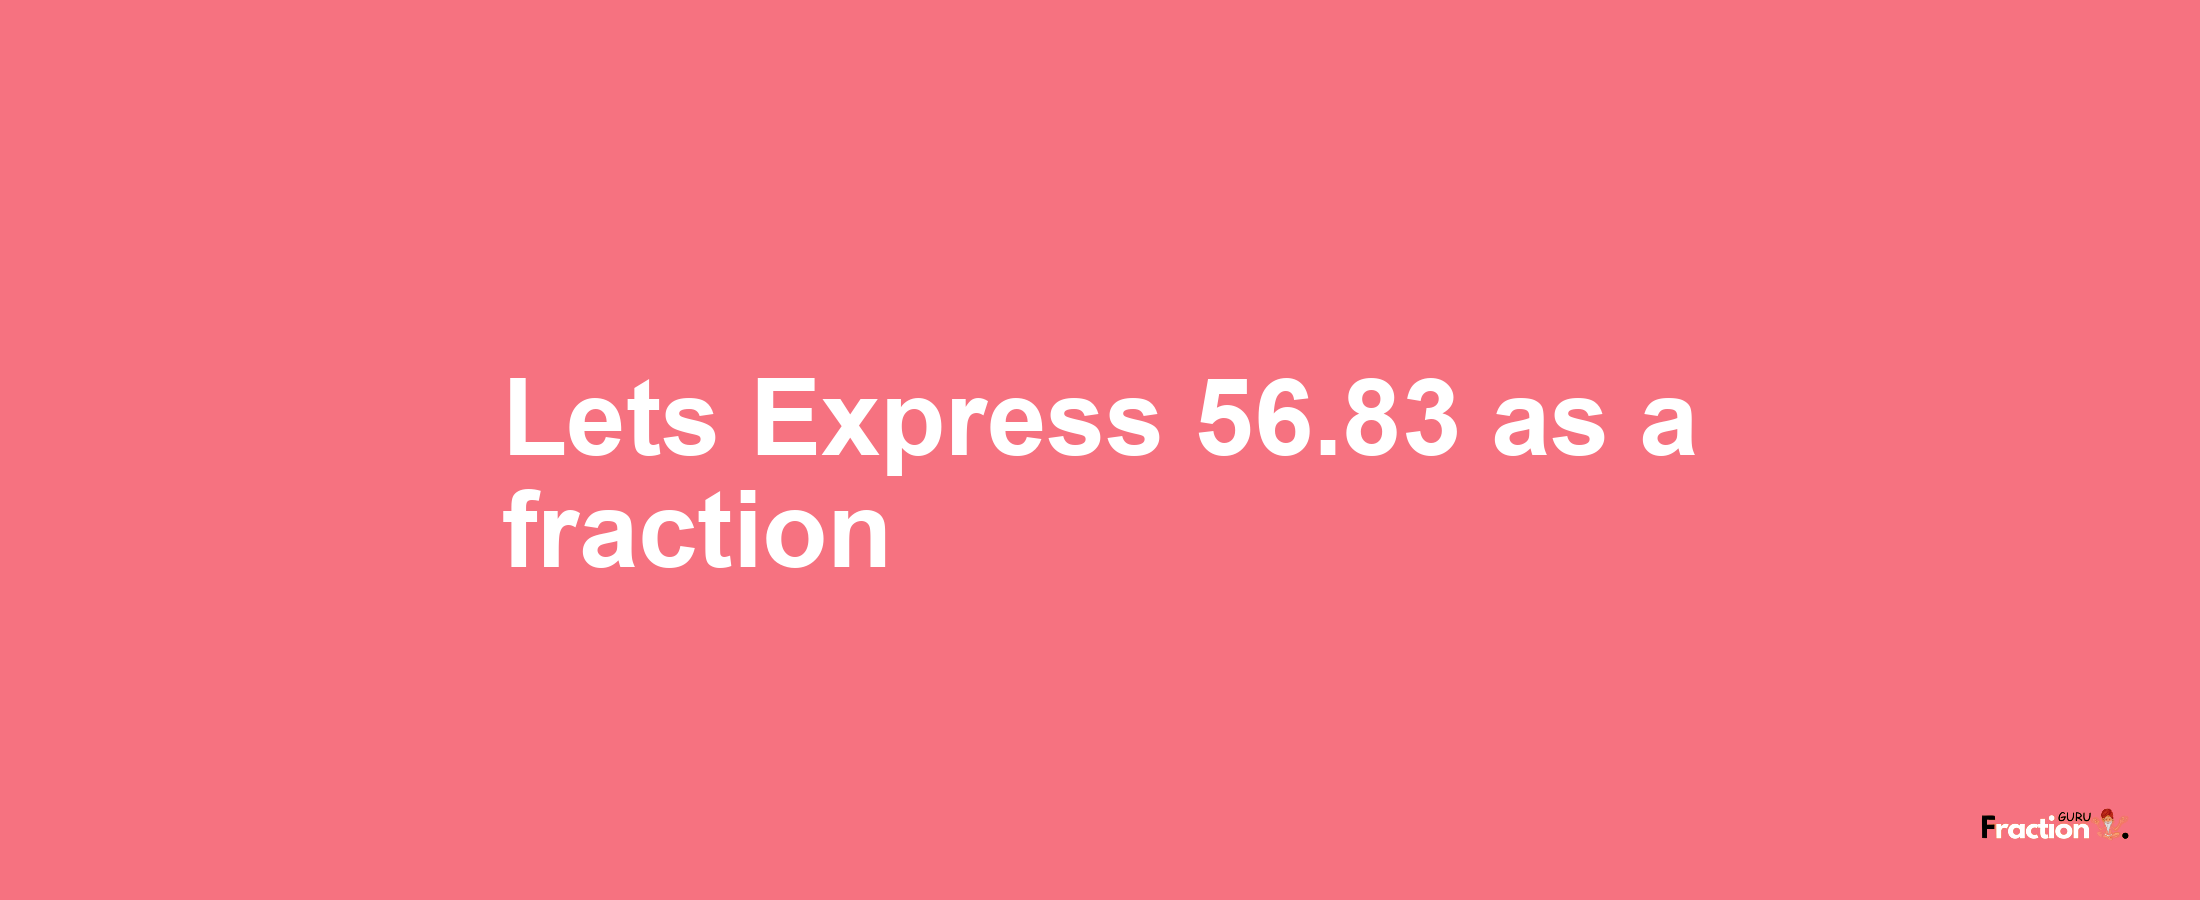 Lets Express 56.83 as afraction